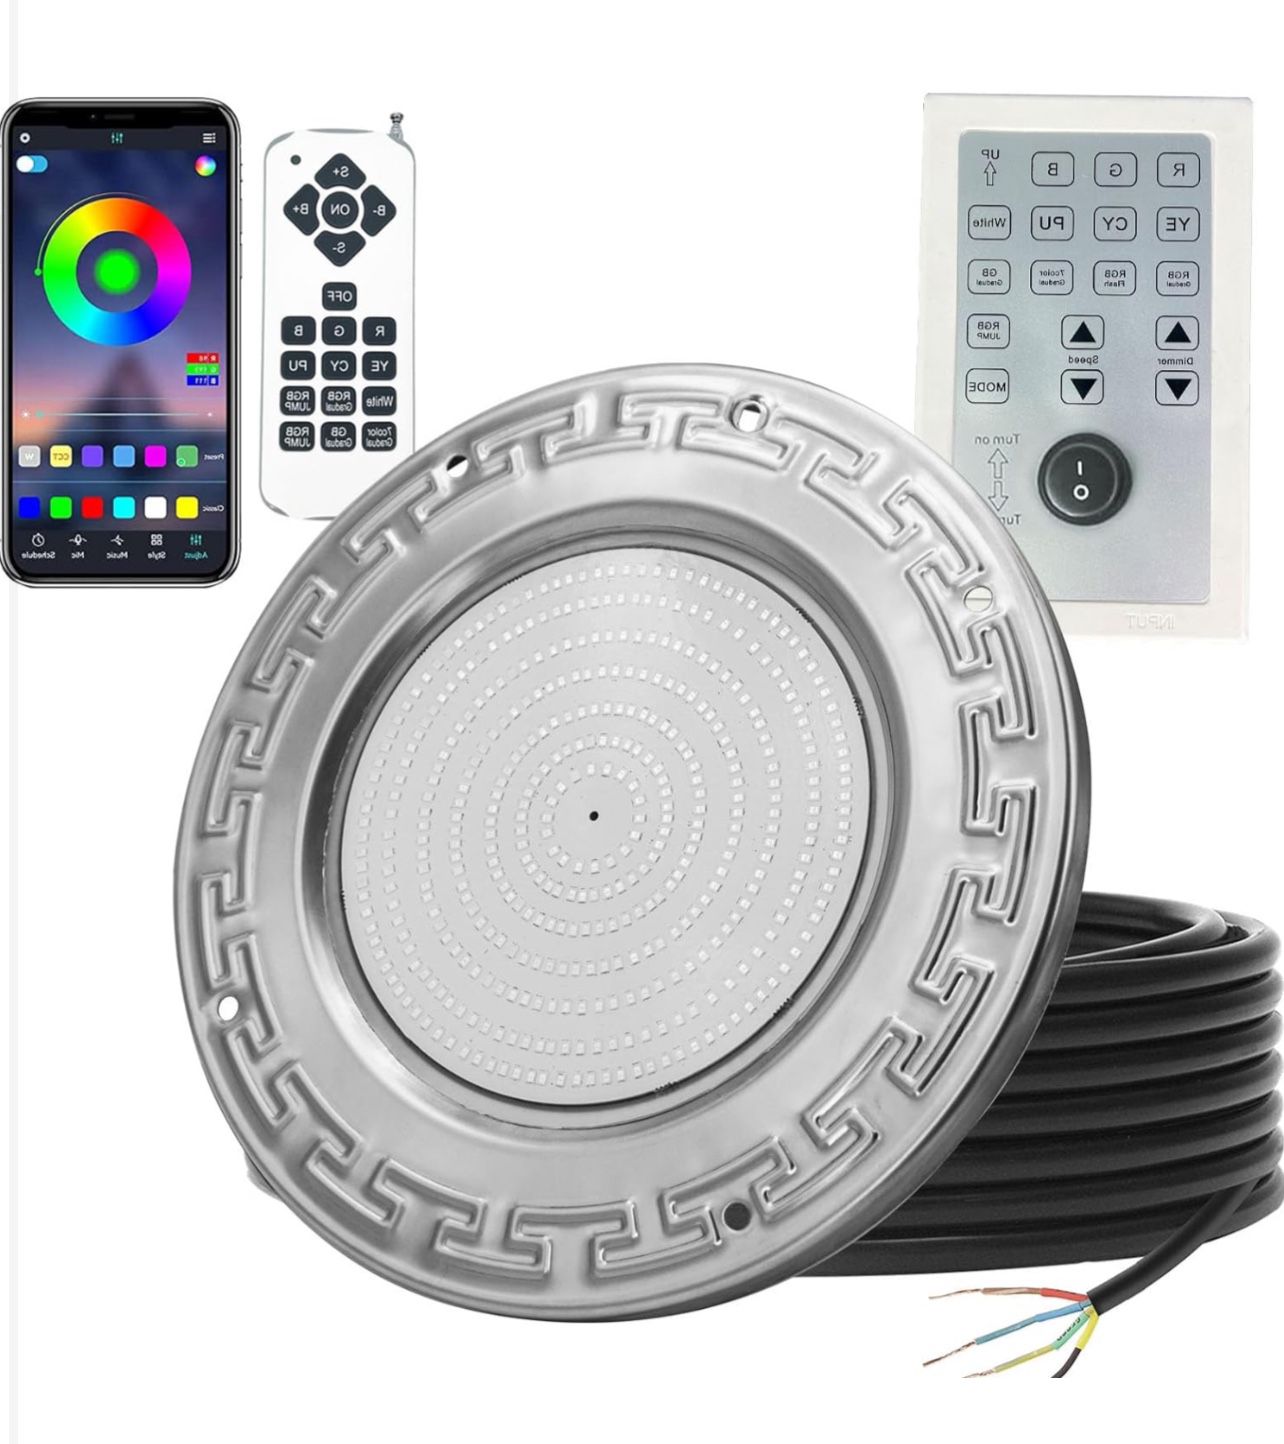 Brand New In The Box- Pool Lights for Inground Pool, 60W 10 Inch Color Changing LED Inground Pool Light with Controller, Remote and APP Control for We